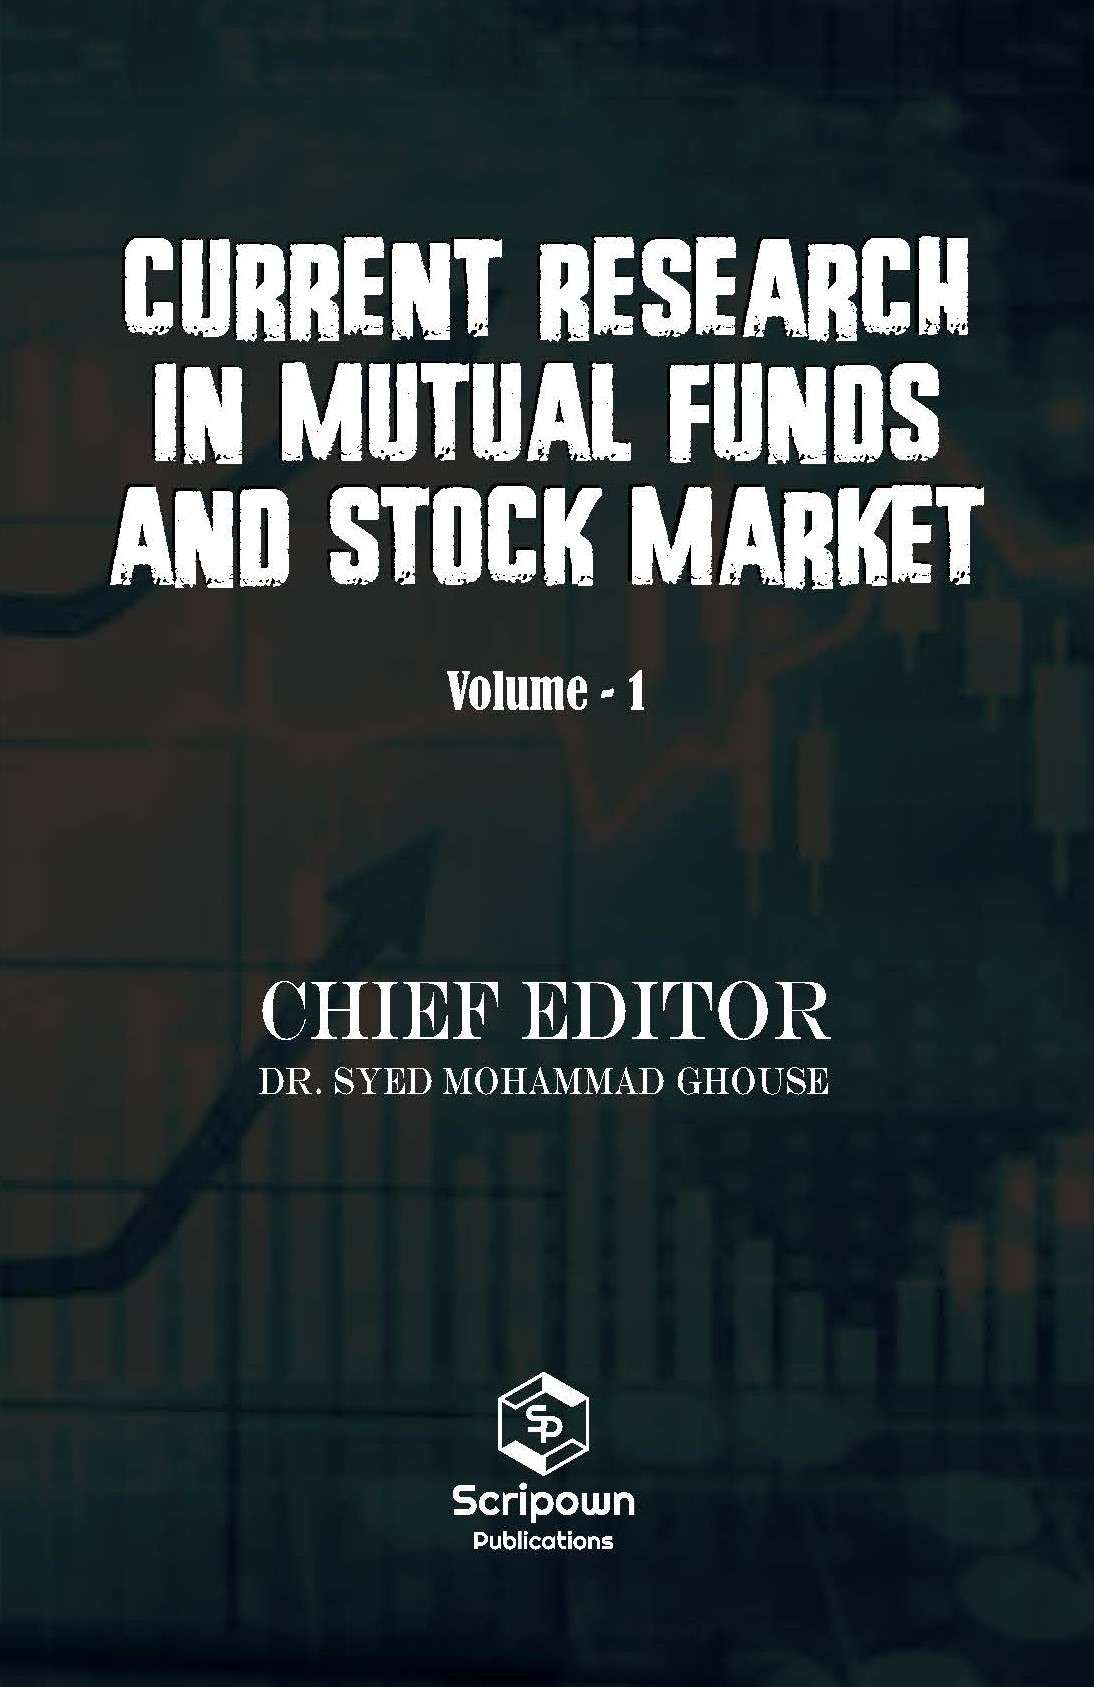 Current Research in Mutual Funds and Stock Market (Volume - 1)